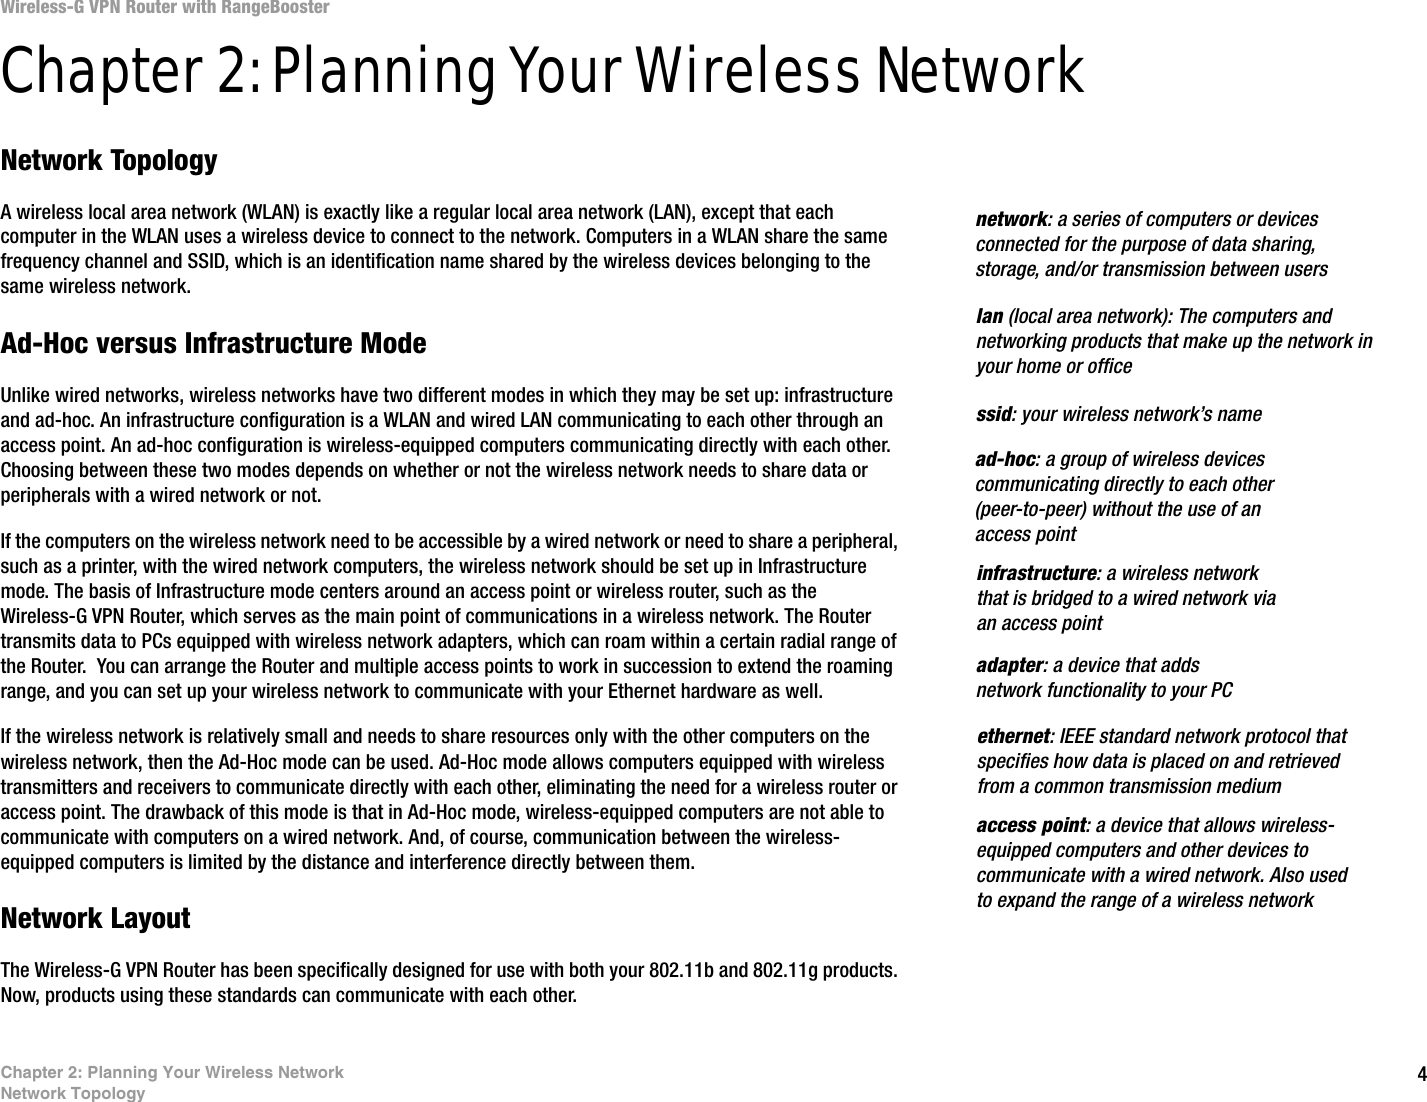 4Chapter 2: Planning Your Wireless NetworkNetwork TopologyWireless-G VPN Router with RangeBoosterChapter 2: Planning Your Wireless NetworkNetwork TopologyA wireless local area network (WLAN) is exactly like a regular local area network (LAN), except that each computer in the WLAN uses a wireless device to connect to the network. Computers in a WLAN share the same frequency channel and SSID, which is an identification name shared by the wireless devices belonging to the same wireless network.Ad-Hoc versus Infrastructure ModeUnlike wired networks, wireless networks have two different modes in which they may be set up: infrastructure and ad-hoc. An infrastructure configuration is a WLAN and wired LAN communicating to each other through an access point. An ad-hoc configuration is wireless-equipped computers communicating directly with each other. Choosing between these two modes depends on whether or not the wireless network needs to share data or peripherals with a wired network or not. If the computers on the wireless network need to be accessible by a wired network or need to share a peripheral, such as a printer, with the wired network computers, the wireless network should be set up in Infrastructure mode. The basis of Infrastructure mode centers around an access point or wireless router, such as the Wireless-G VPN Router, which serves as the main point of communications in a wireless network. The Router transmits data to PCs equipped with wireless network adapters, which can roam within a certain radial range of the Router.  You can arrange the Router and multiple access points to work in succession to extend the roaming range, and you can set up your wireless network to communicate with your Ethernet hardware as well. If the wireless network is relatively small and needs to share resources only with the other computers on the wireless network, then the Ad-Hoc mode can be used. Ad-Hoc mode allows computers equipped with wireless transmitters and receivers to communicate directly with each other, eliminating the need for a wireless router or access point. The drawback of this mode is that in Ad-Hoc mode, wireless-equipped computers are not able to communicate with computers on a wired network. And, of course, communication between the wireless-equipped computers is limited by the distance and interference directly between them. Network LayoutThe Wireless-G VPN Router has been specifically designed for use with both your 802.11b and 802.11g products. Now, products using these standards can communicate with each other.infrastructure: a wireless network that is bridged to a wired network via an access pointssid: your wireless network’s namead-hoc: a group of wireless devices communicating directly to each other (peer-to-peer) without the use of an access pointaccess point: a device that allows wireless-equipped computers and other devices to communicate with a wired network. Also used to expand the range of a wireless networkadapter: a device that adds network functionality to your PCethernet: IEEE standard network protocol that specifies how data is placed on and retrieved from a common transmission mediumnetwork: a series of computers or devices connected for the purpose of data sharing, storage, and/or transmission between userslan (local area network): The computers and networking products that make up the network in your home or office